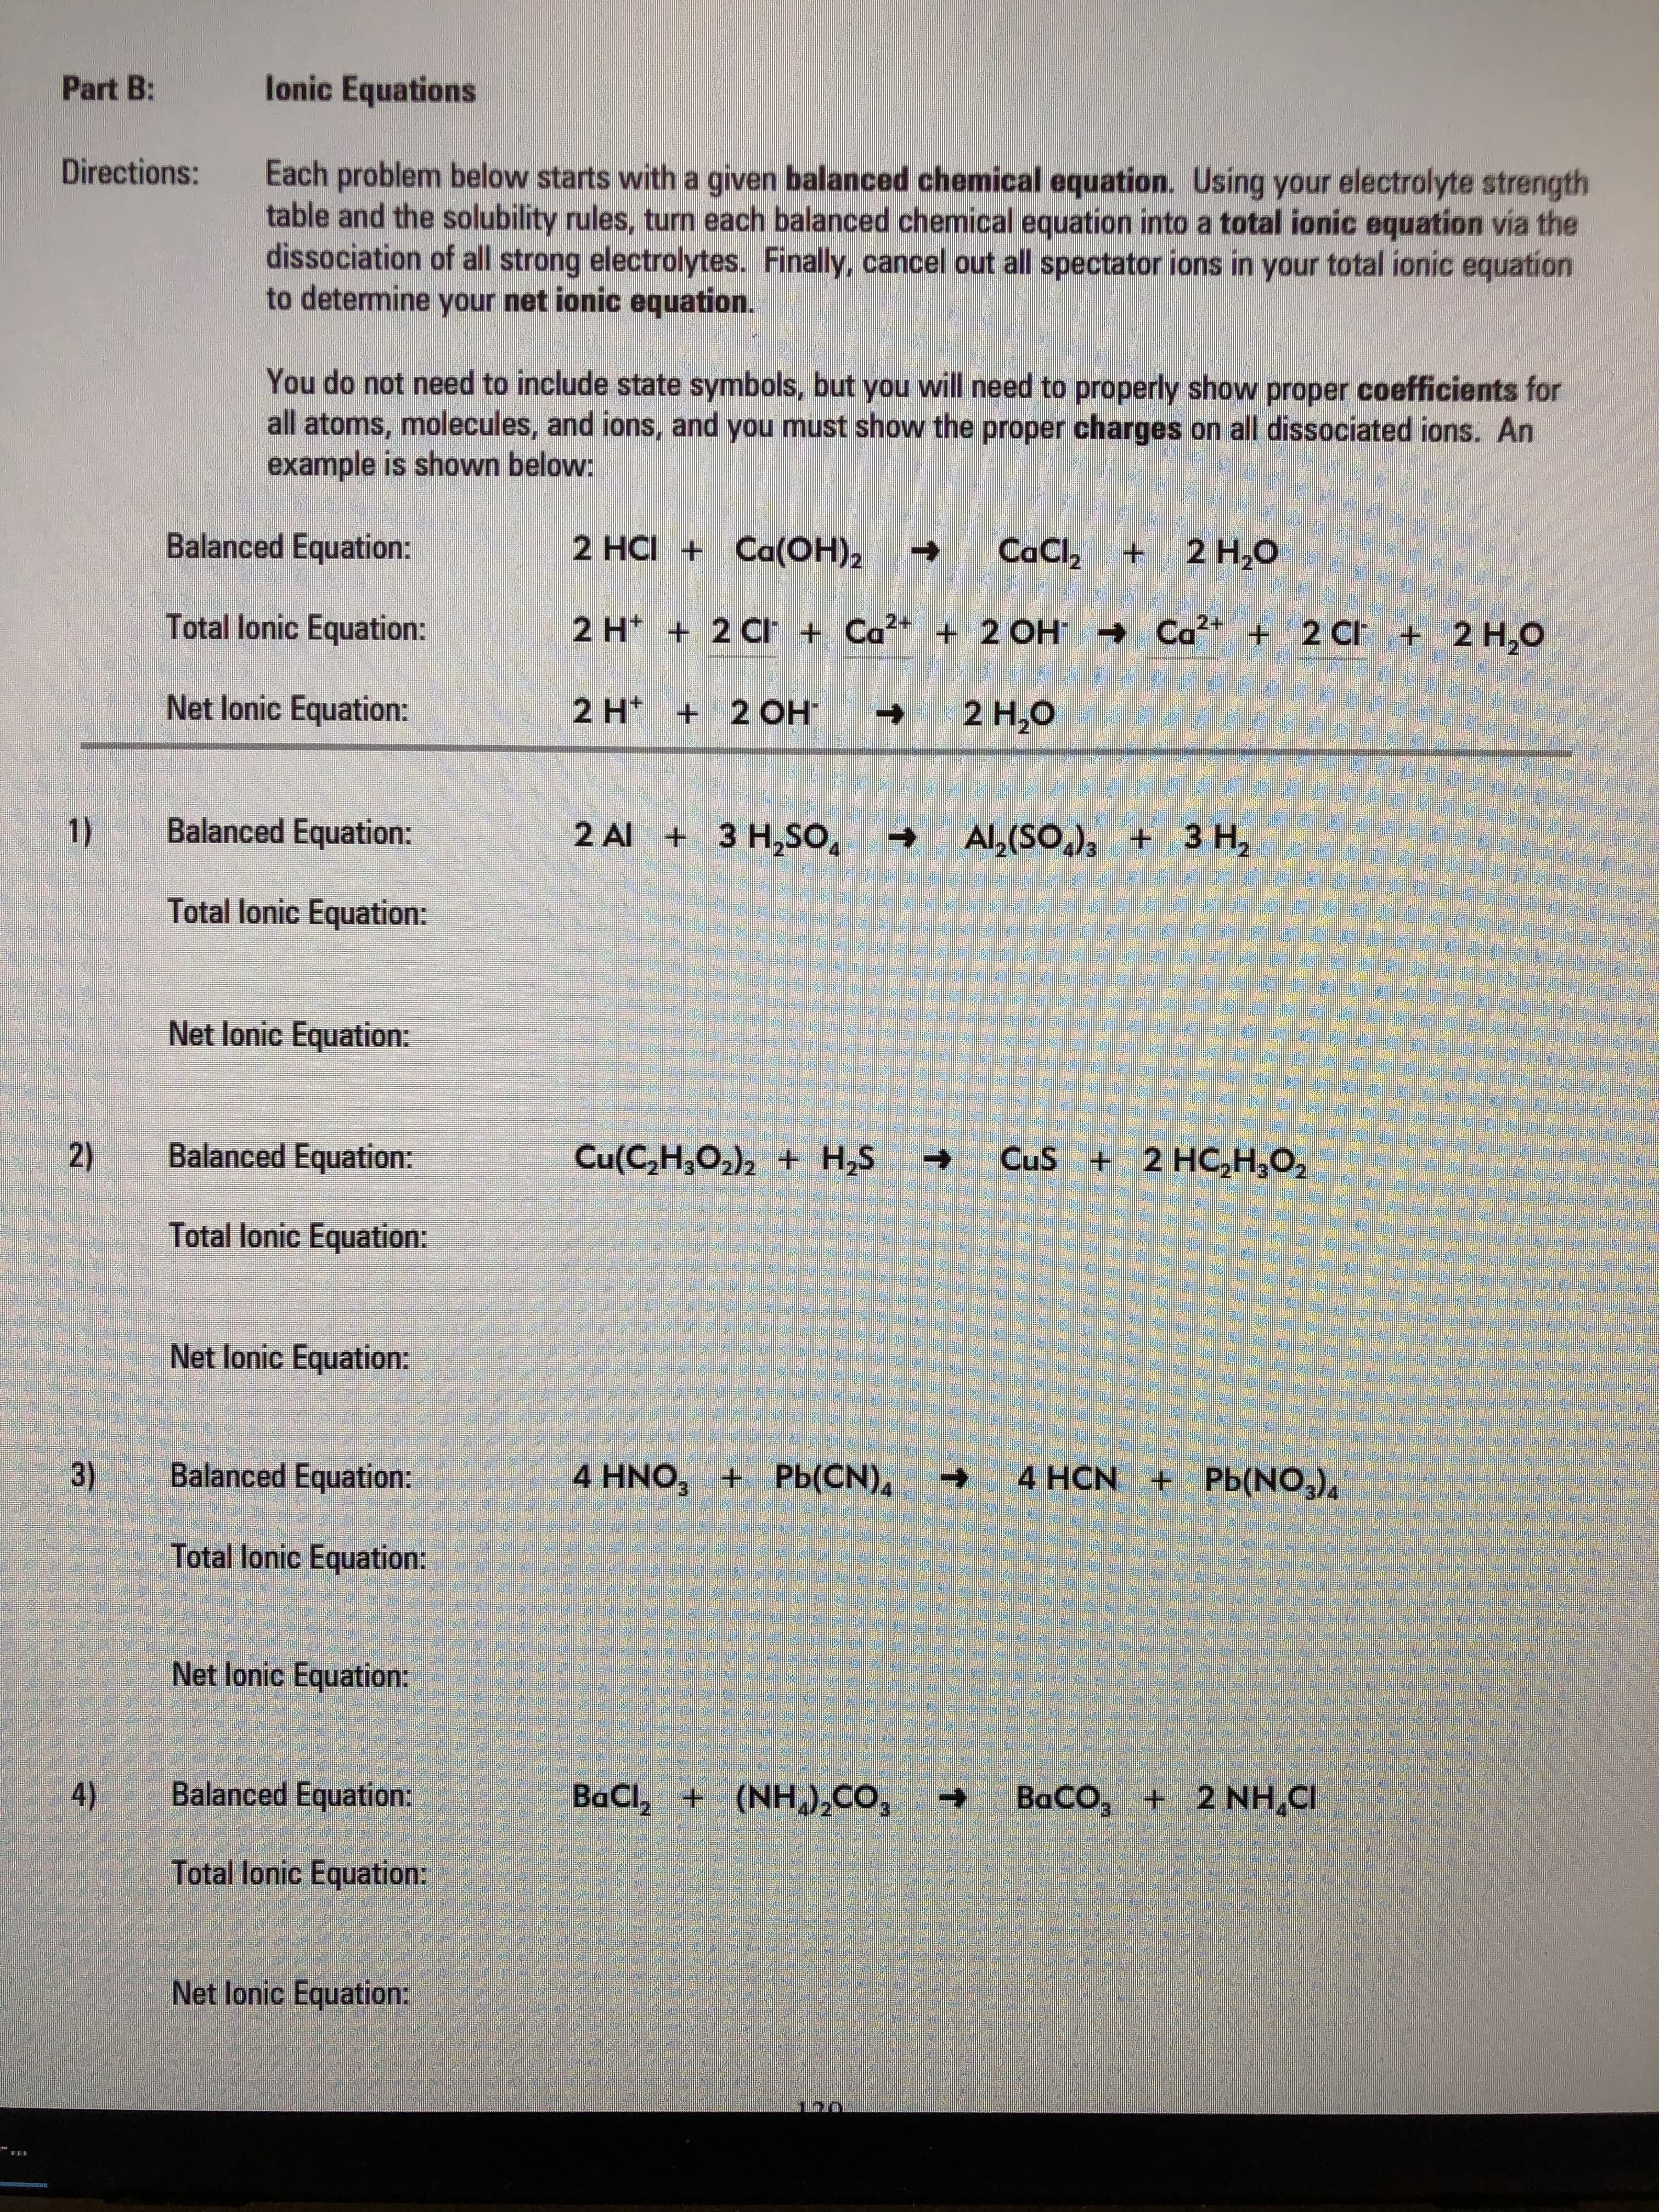 Each problem below starts with a given balanced chemical equation. Using your electrolyte strength
table and the solubility rules, turn each balanced chemical equation into a total ionic equation via the
dissociation of all strong electrolytes. Finally, cancel out all spectator ions in your total ionic equation
to determine your net ionic equation.
